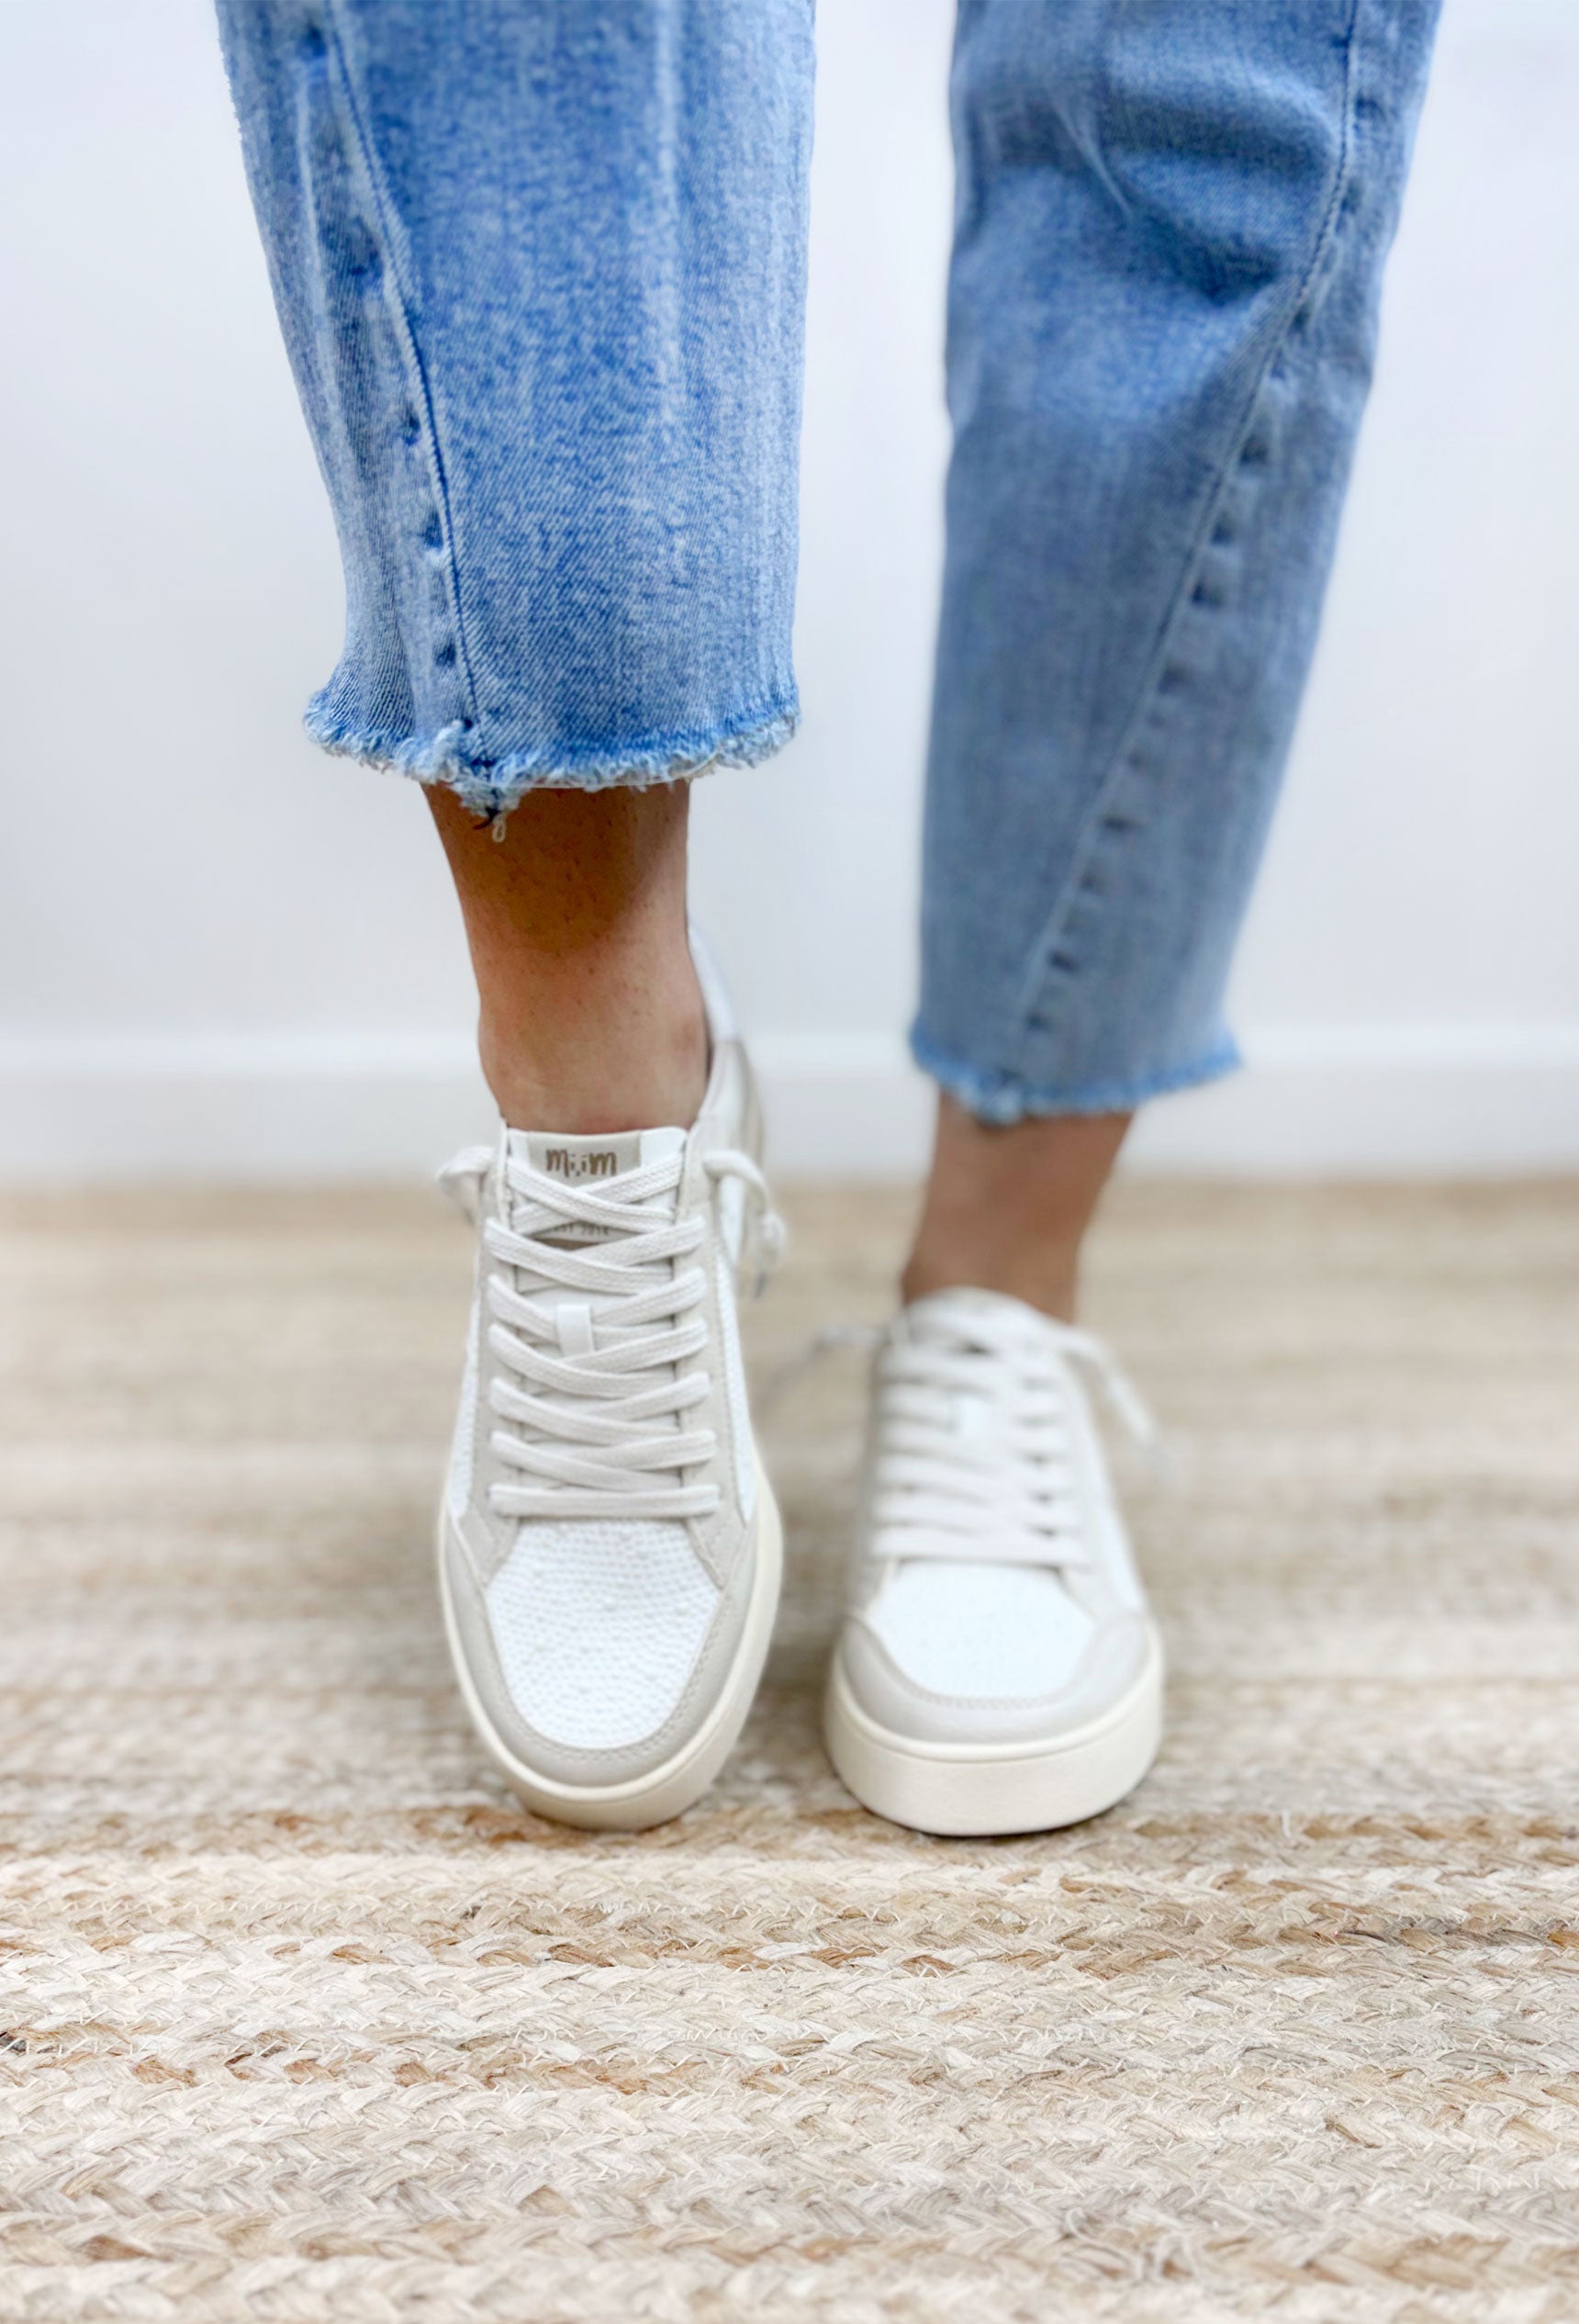 Juniper Star Sneakers in White Beige, cream and white sneaker with pearl detailing and a white star